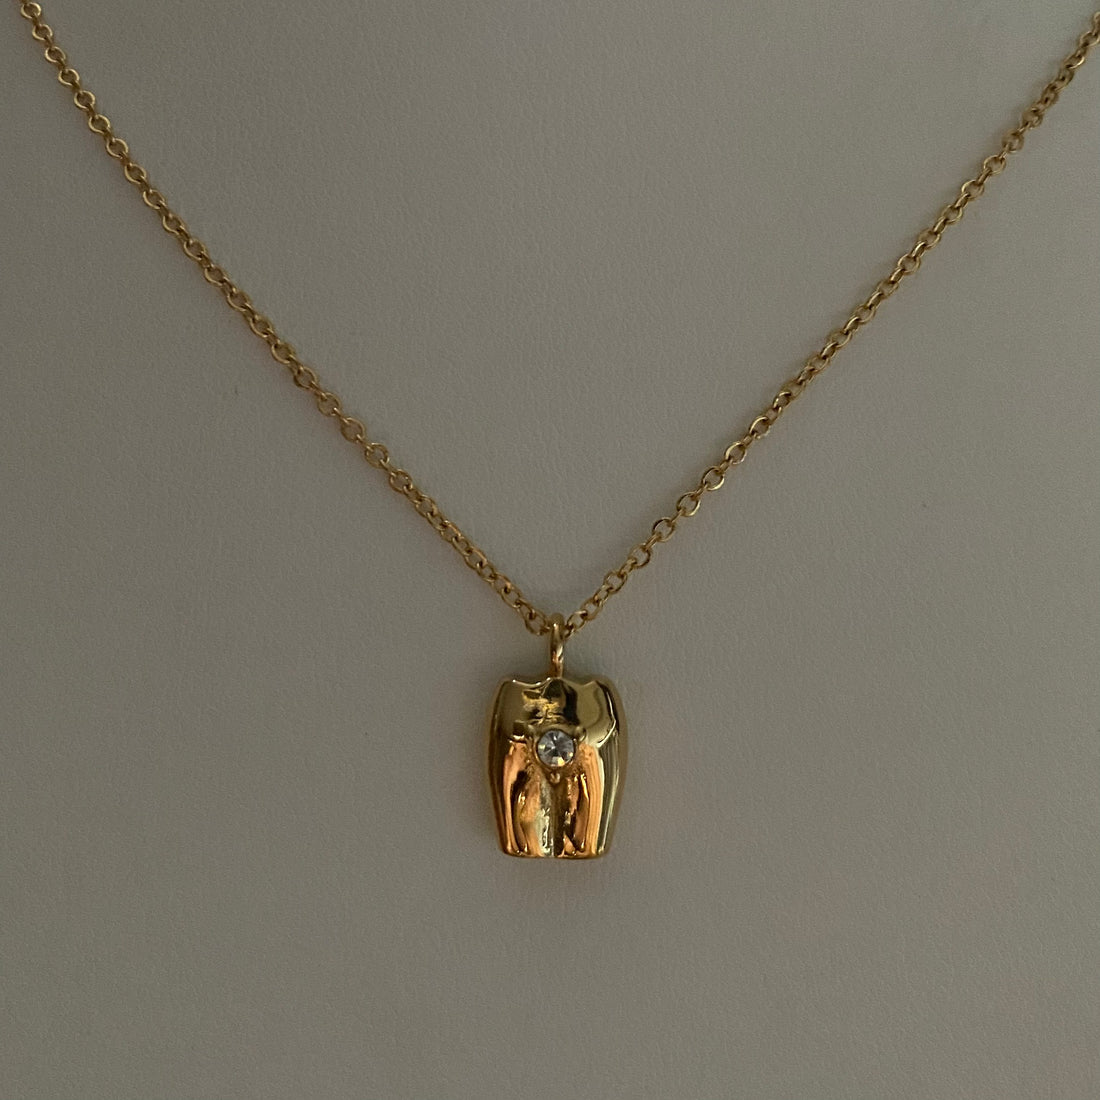 P*SSY POWER 18k Gold Plated Necklace